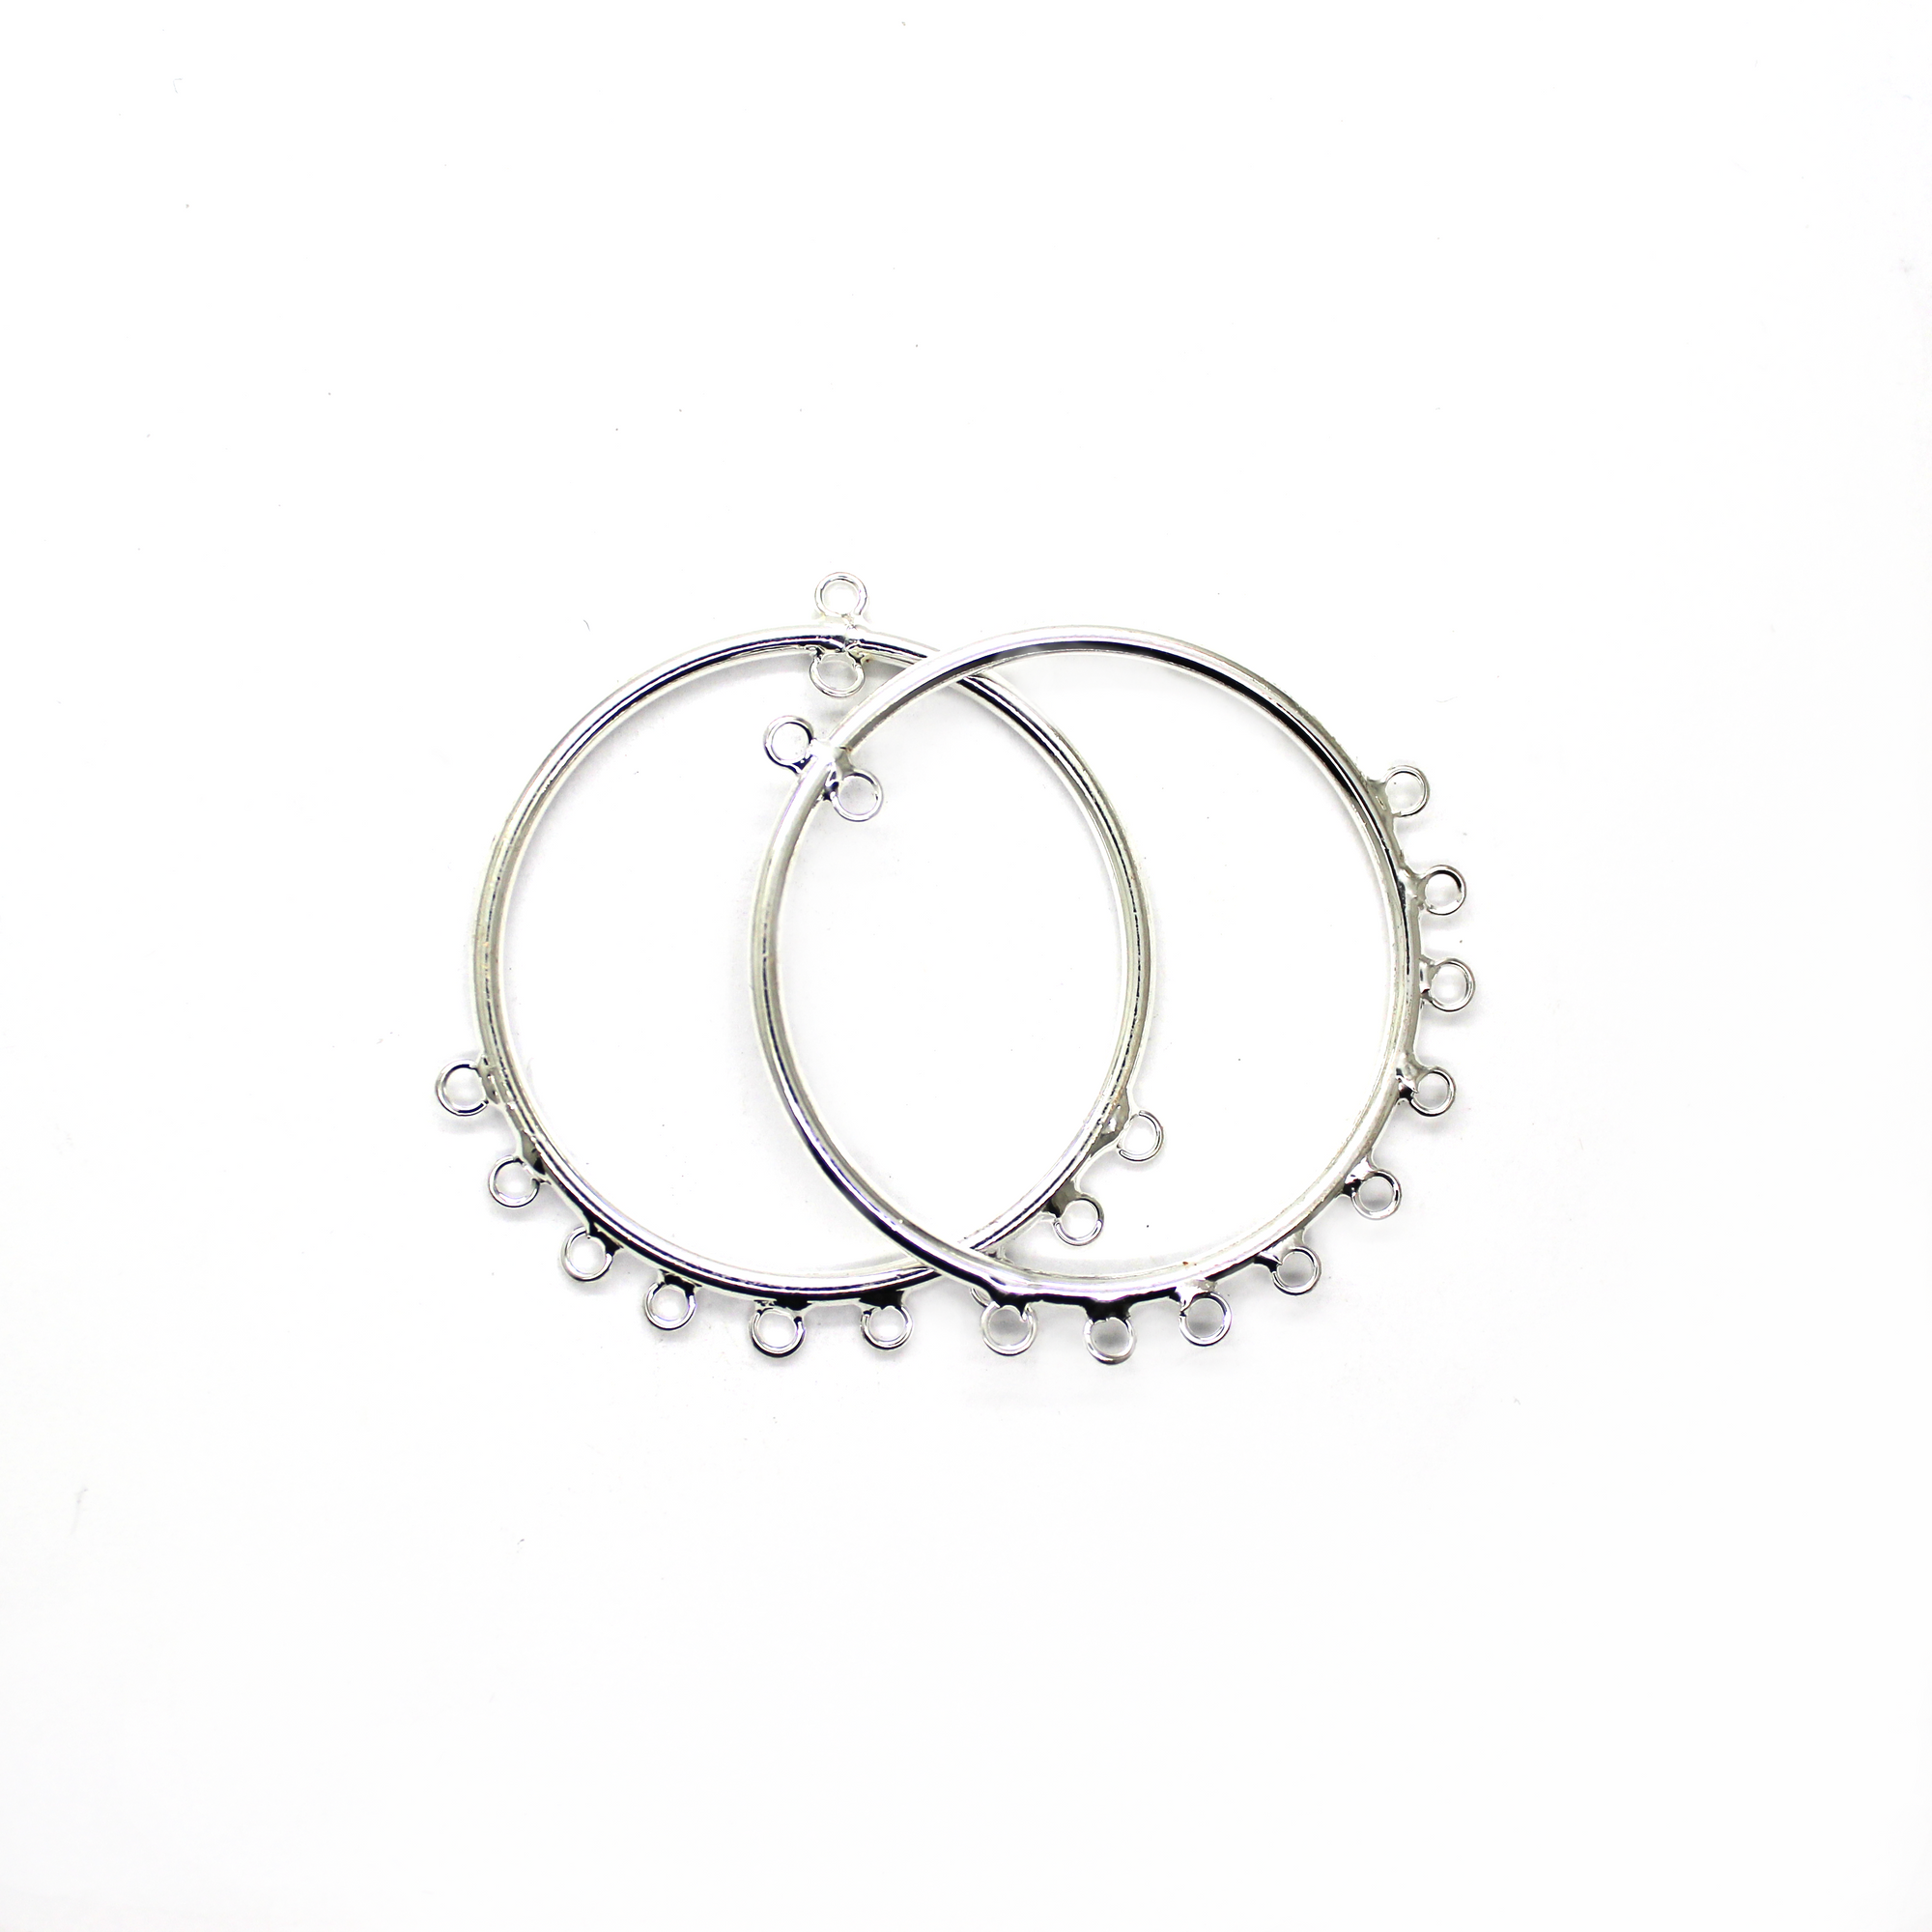 Earring Hoop with 9 Loops, Bright Silver, Alloy, 46mm x 40mm x 2mm, Sold Per pkg of 3 pairs